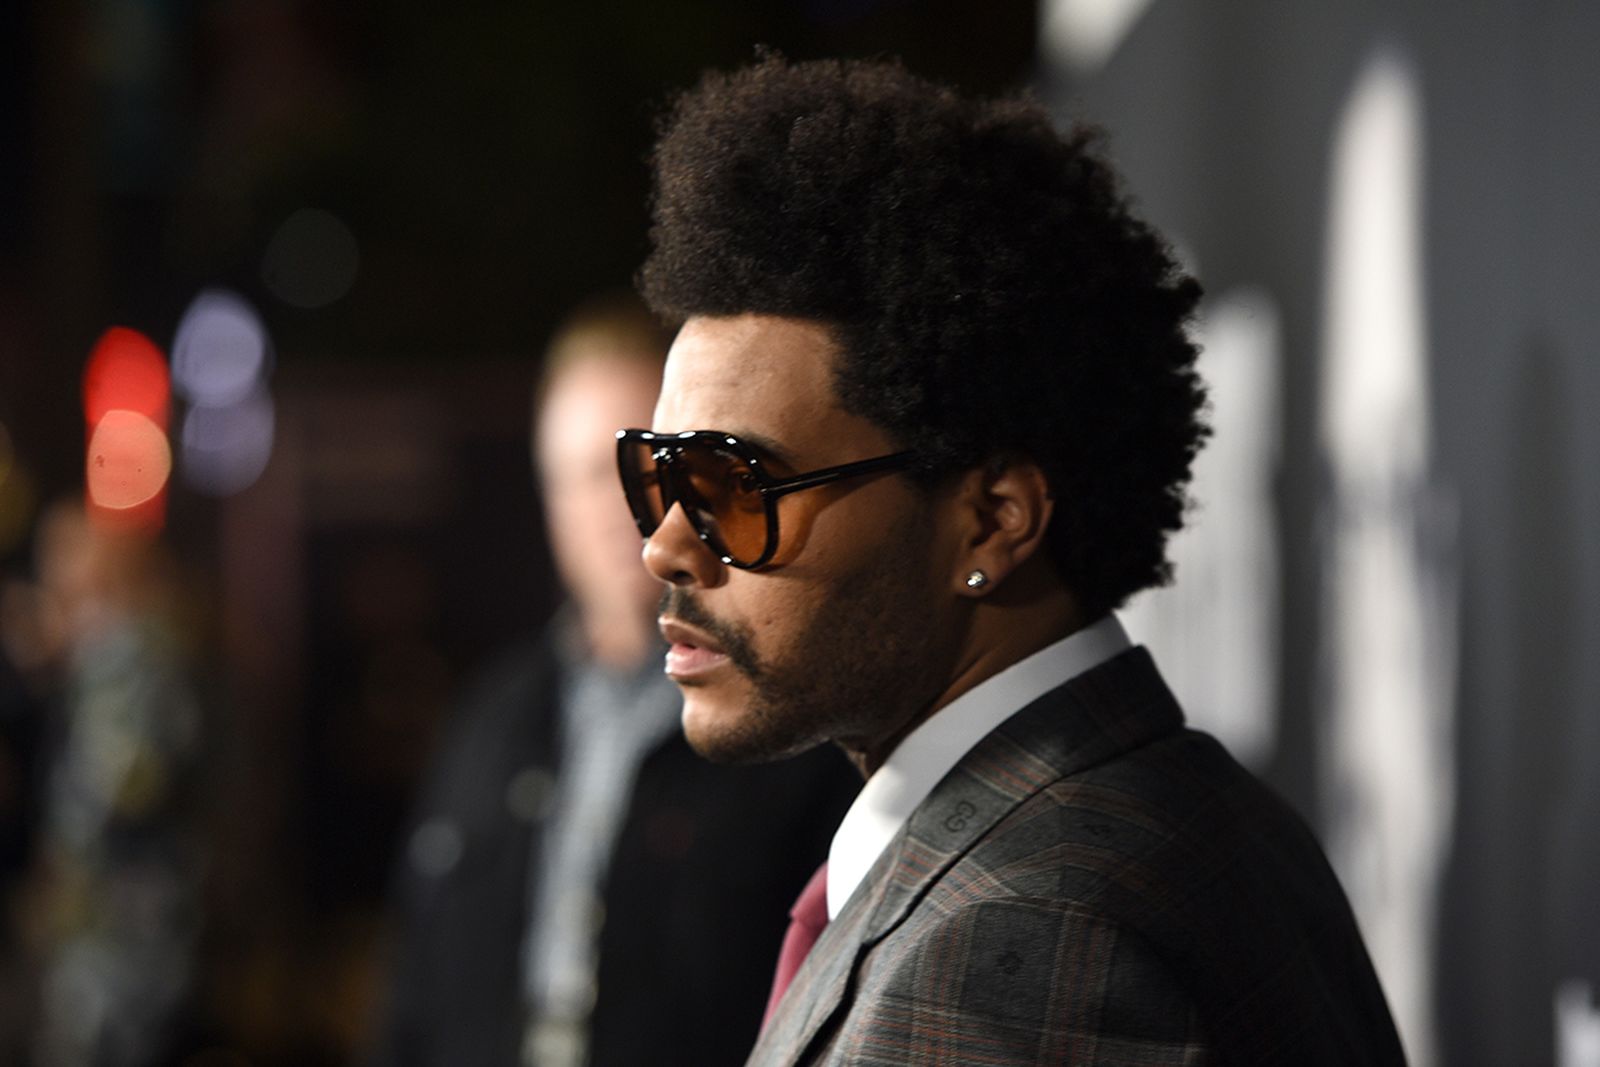 The Weeknd sunglasses suit